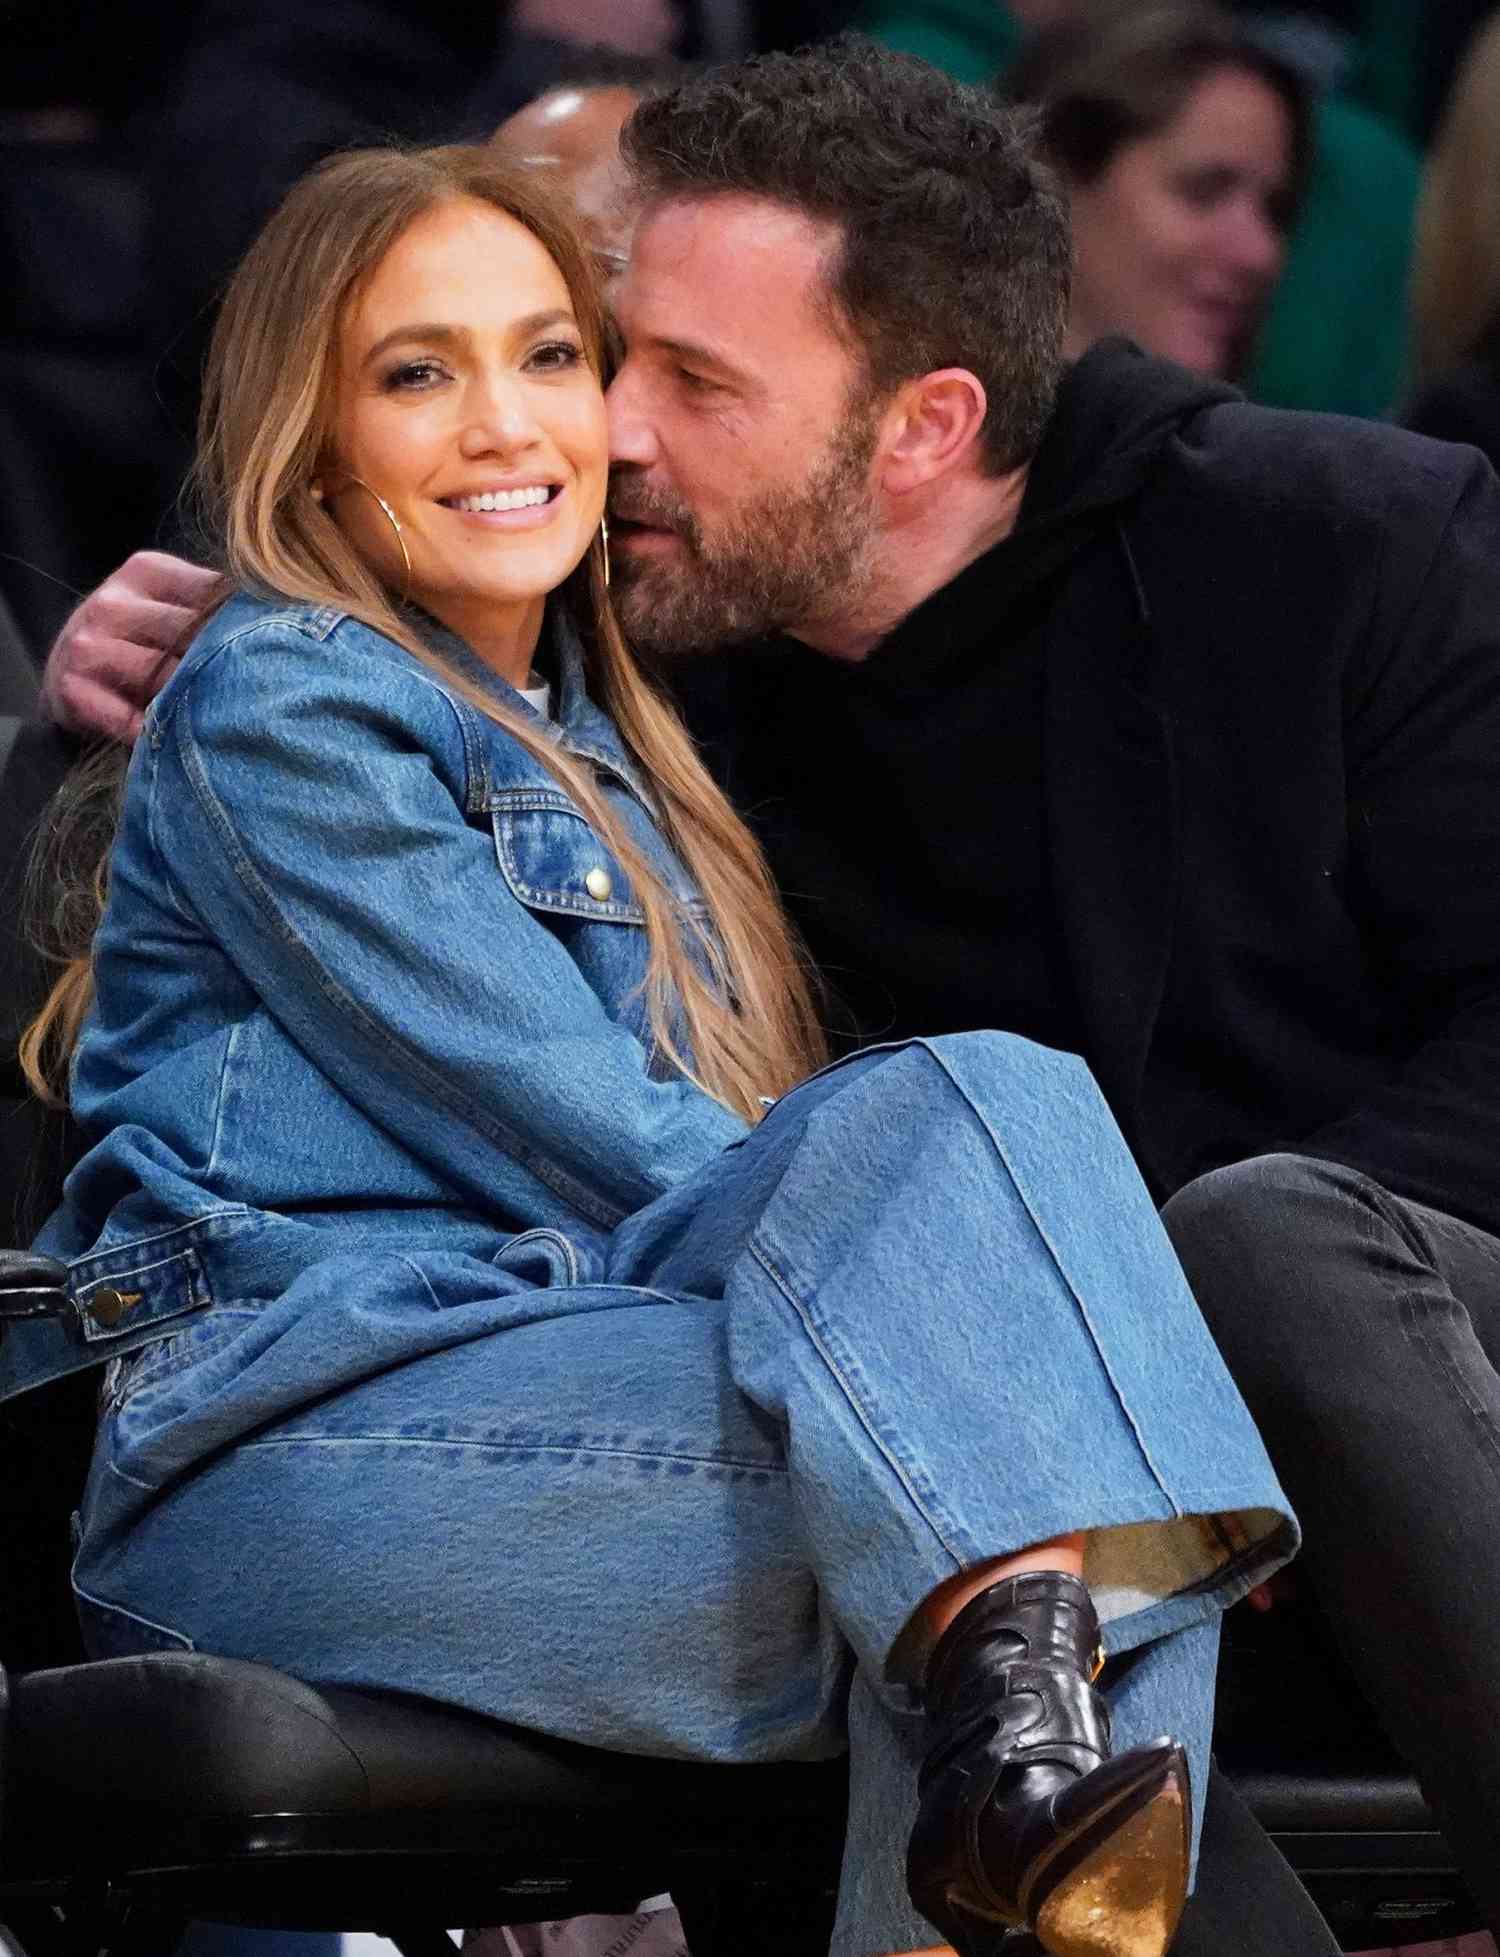 Jennifer Lopez, left, and Ben Affleck attend an NBA basketball game between the Los Angeles Lakers and the Boston Celtics on Tuesday, Dec. 7, 2021, in Los Angeles. (AP Photo/Marcio Jose Sanchez)